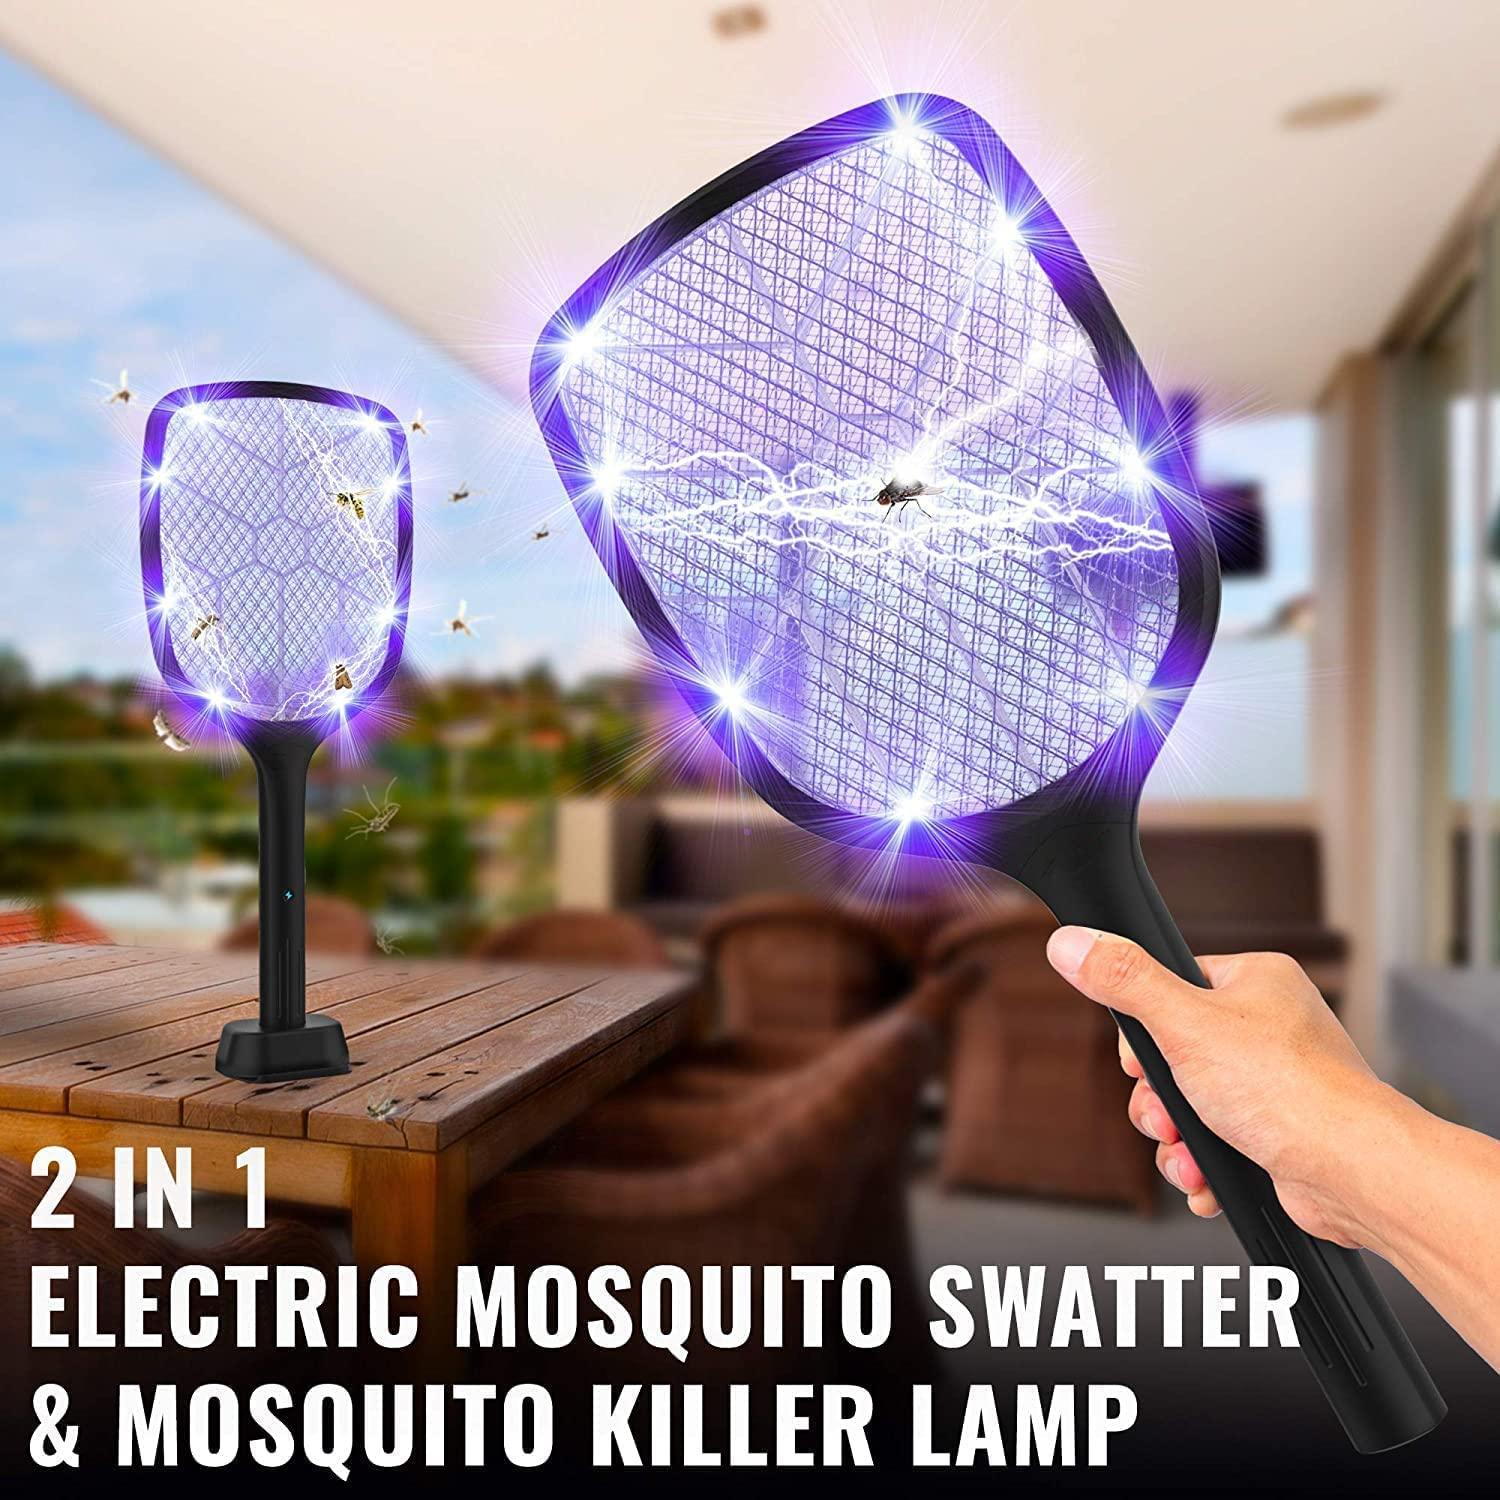 LazyZap™ Electric Fly Swatter - Effective Powerful 4000V Rechargeable Bug Zapper Racket - Lazy Pro